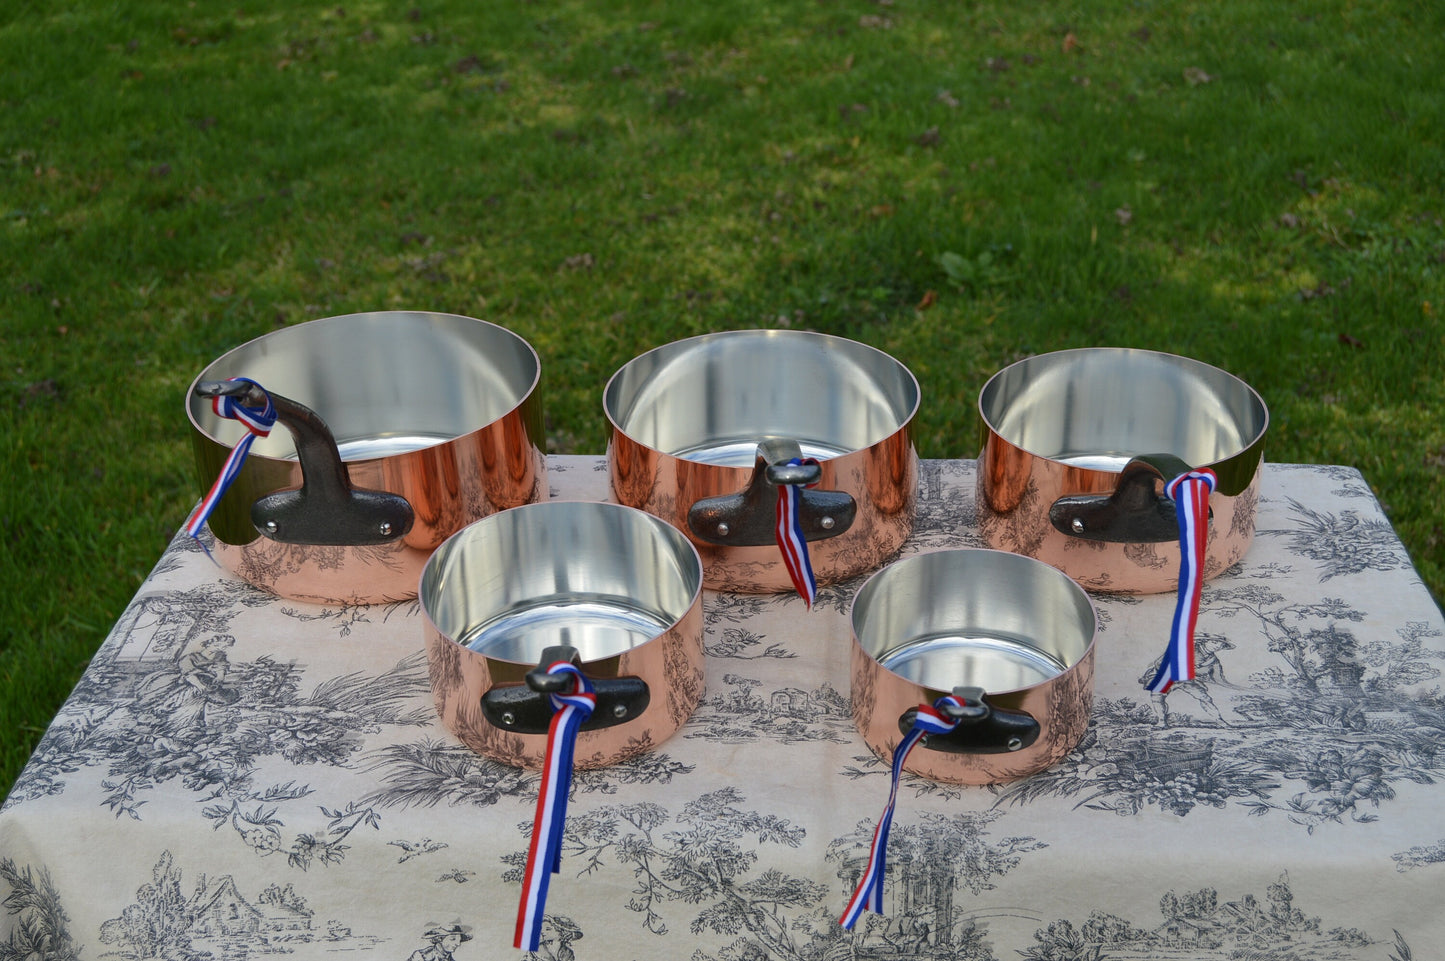 New NKC Copper Pans Professional Grade New Set of Graduated 12cm-20cm 1.4-1.7mm Tin Lined Copper Saucepans Iron Handles Steel Rivets By NKC